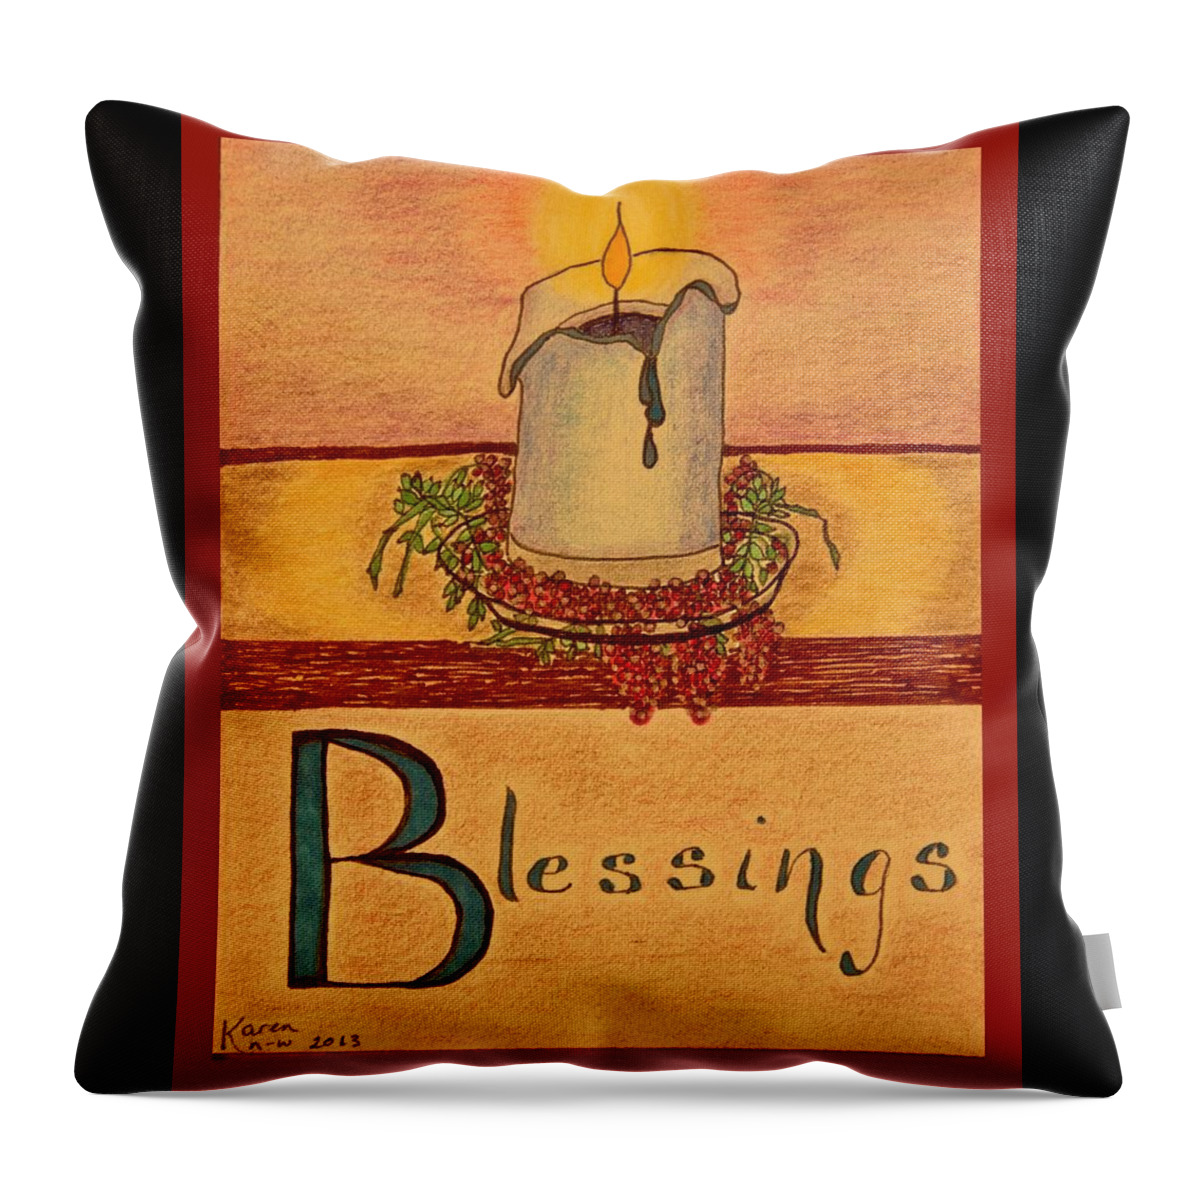 Blessings Throw Pillow featuring the drawing Blessings by Karen Nice-Webb